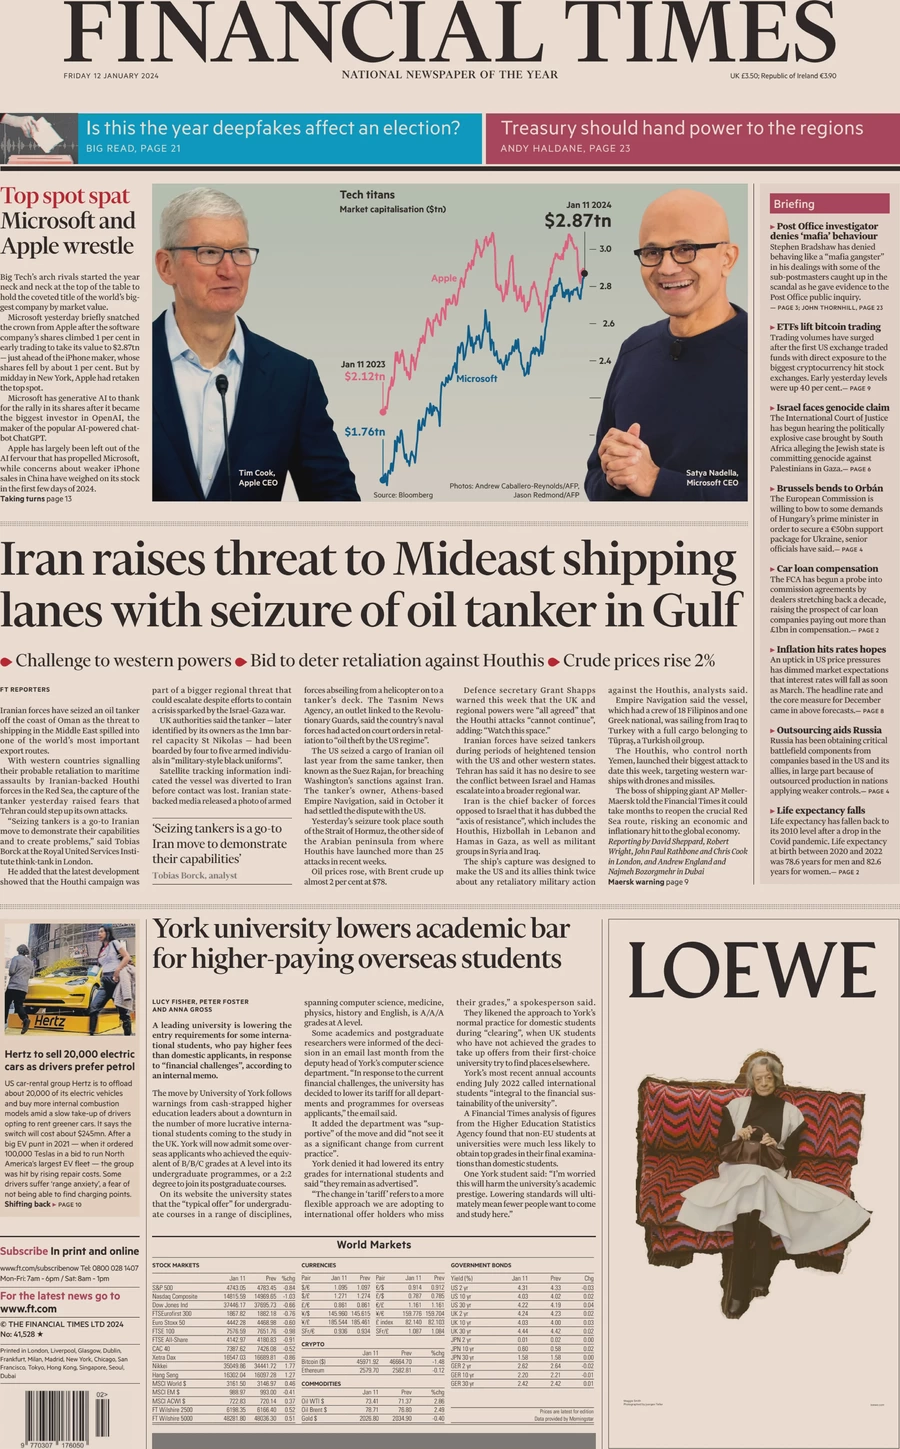 Financial Times - Iran raises threat to Mideast shipping lanes with seizure of oil tanker in Gulf 